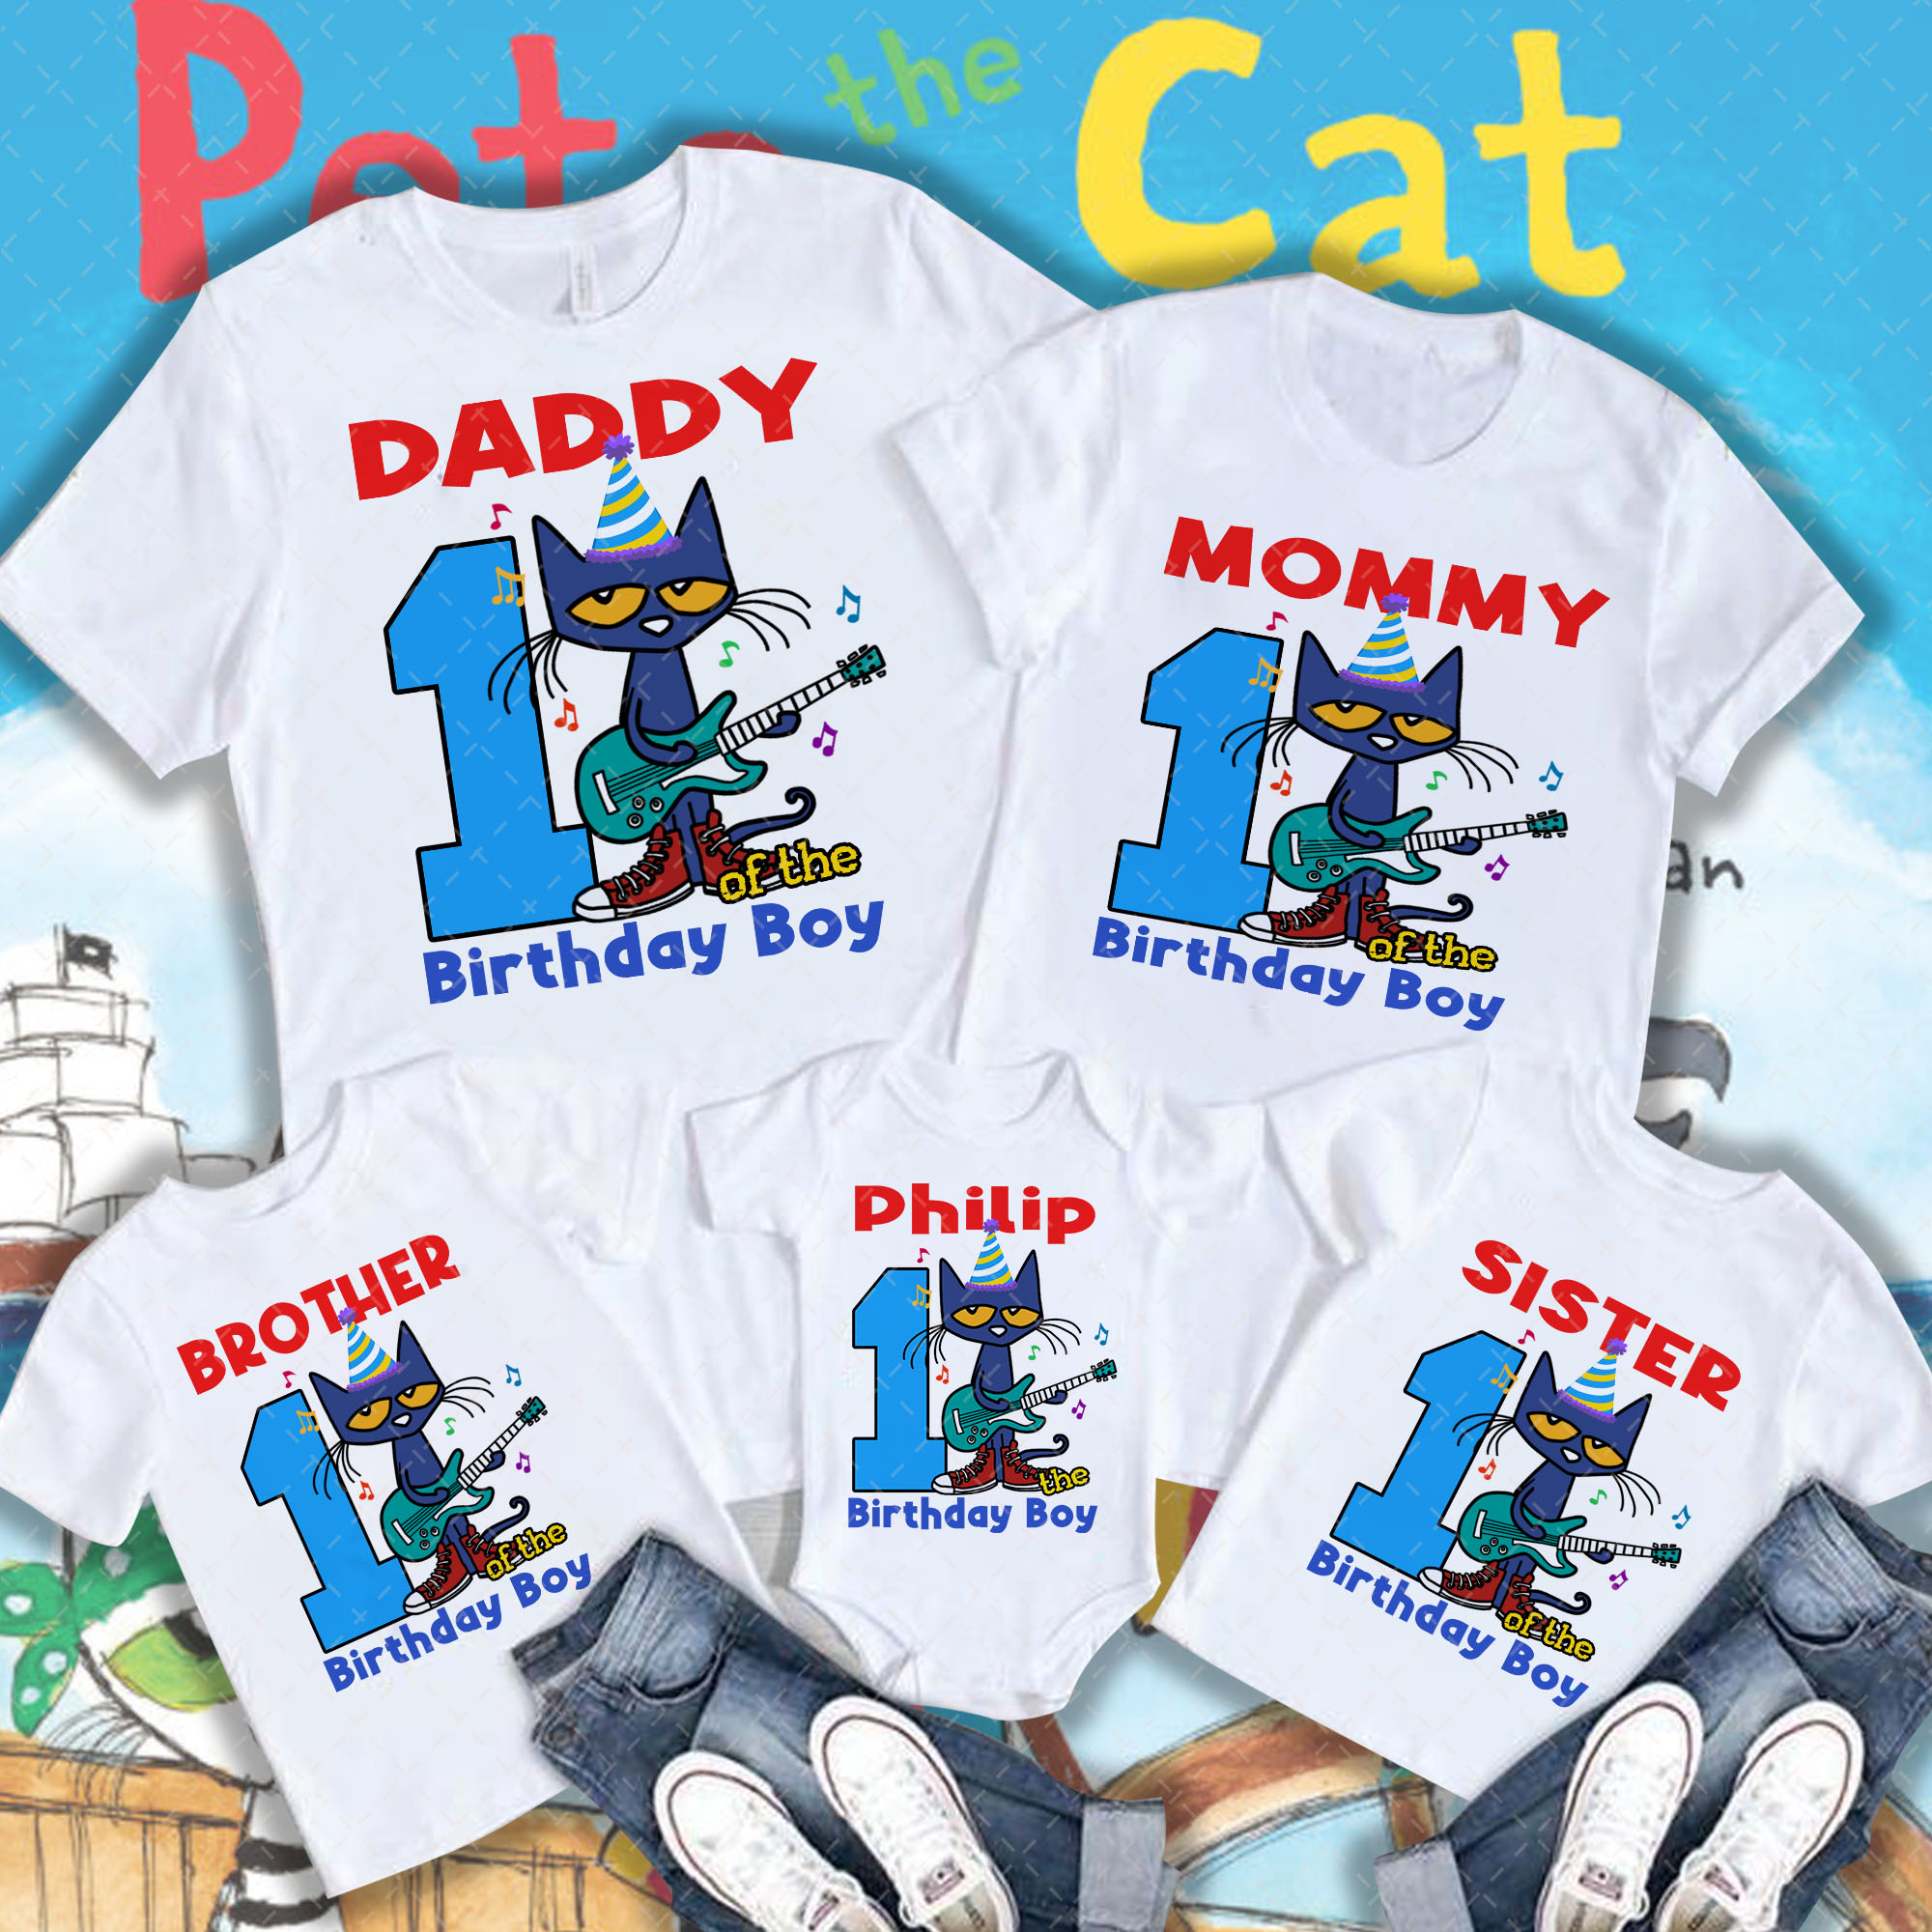 Pete The Cat Birthday Shirt, Groovy Shirt, Pete The Cat Party Shirt, Custom Name And Age Shirt